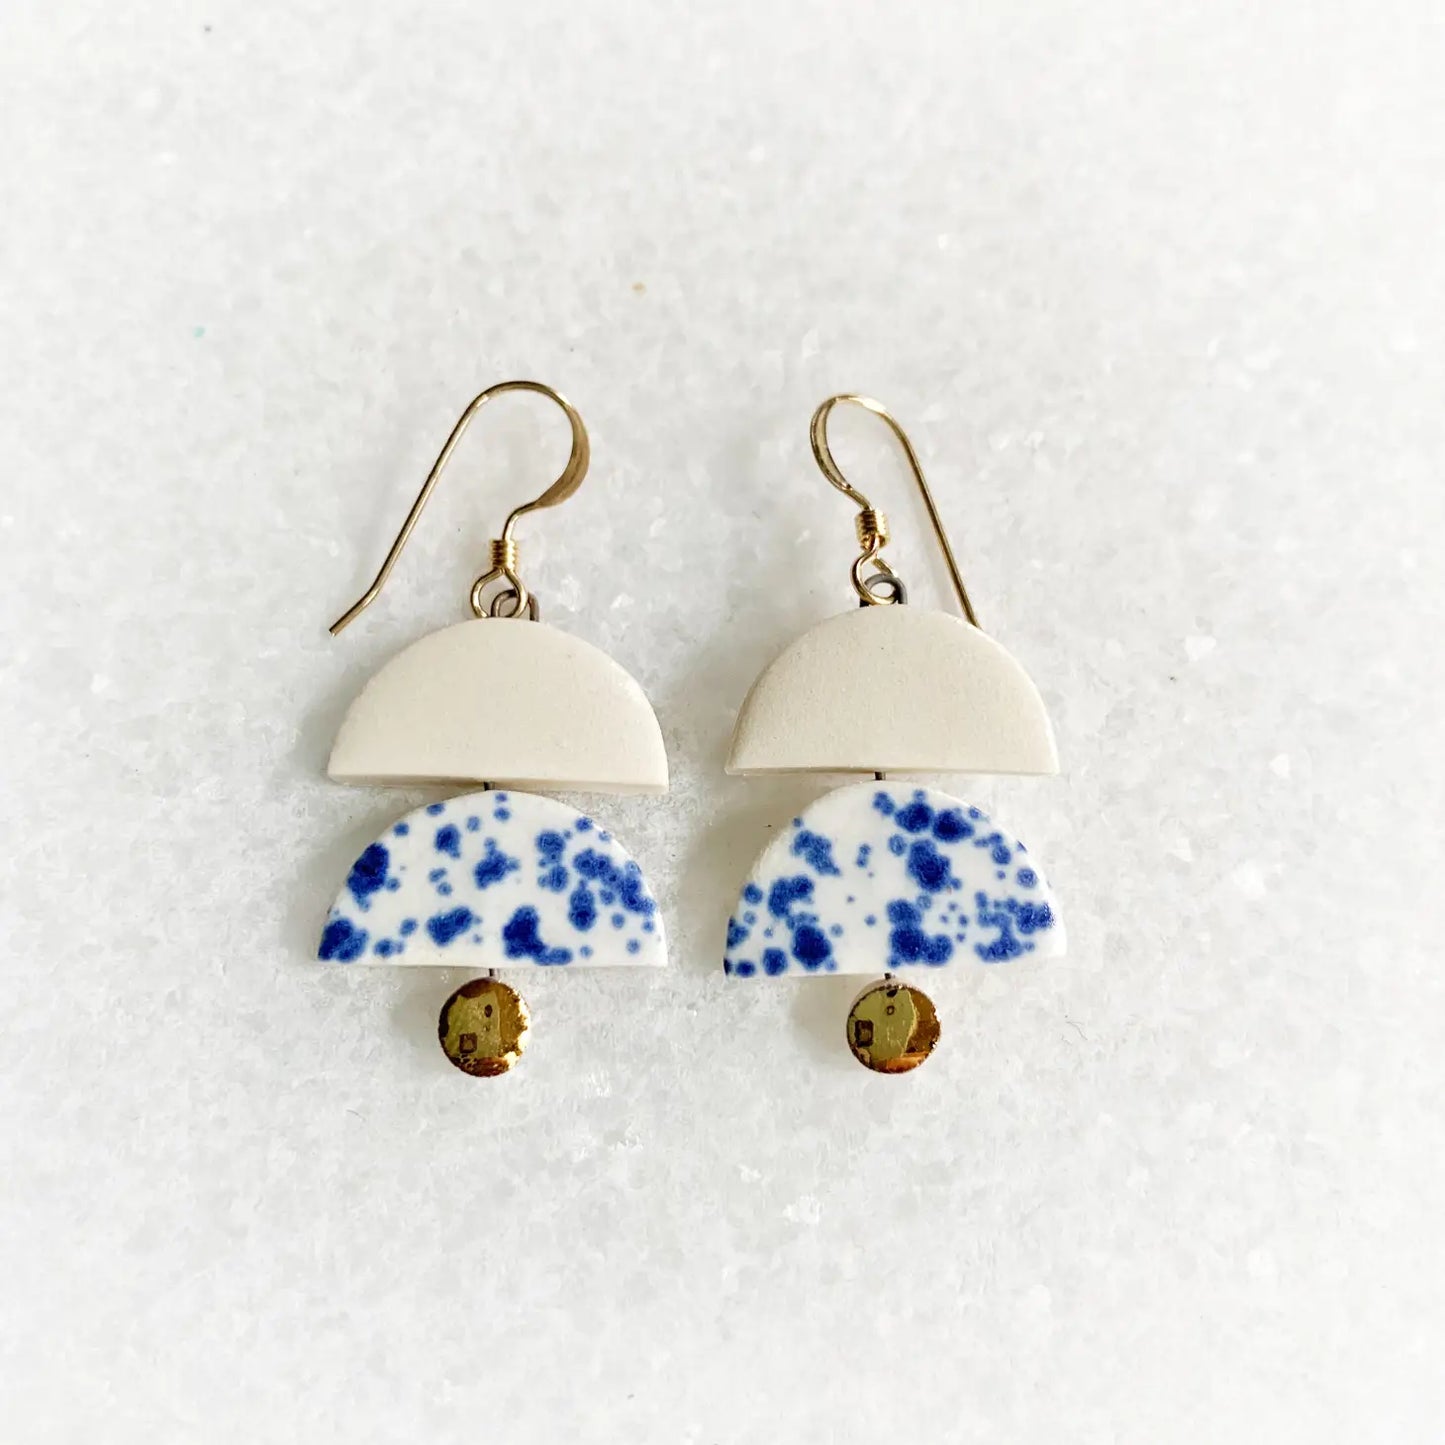 Earrings - Layer - Blue Speckle - Gold